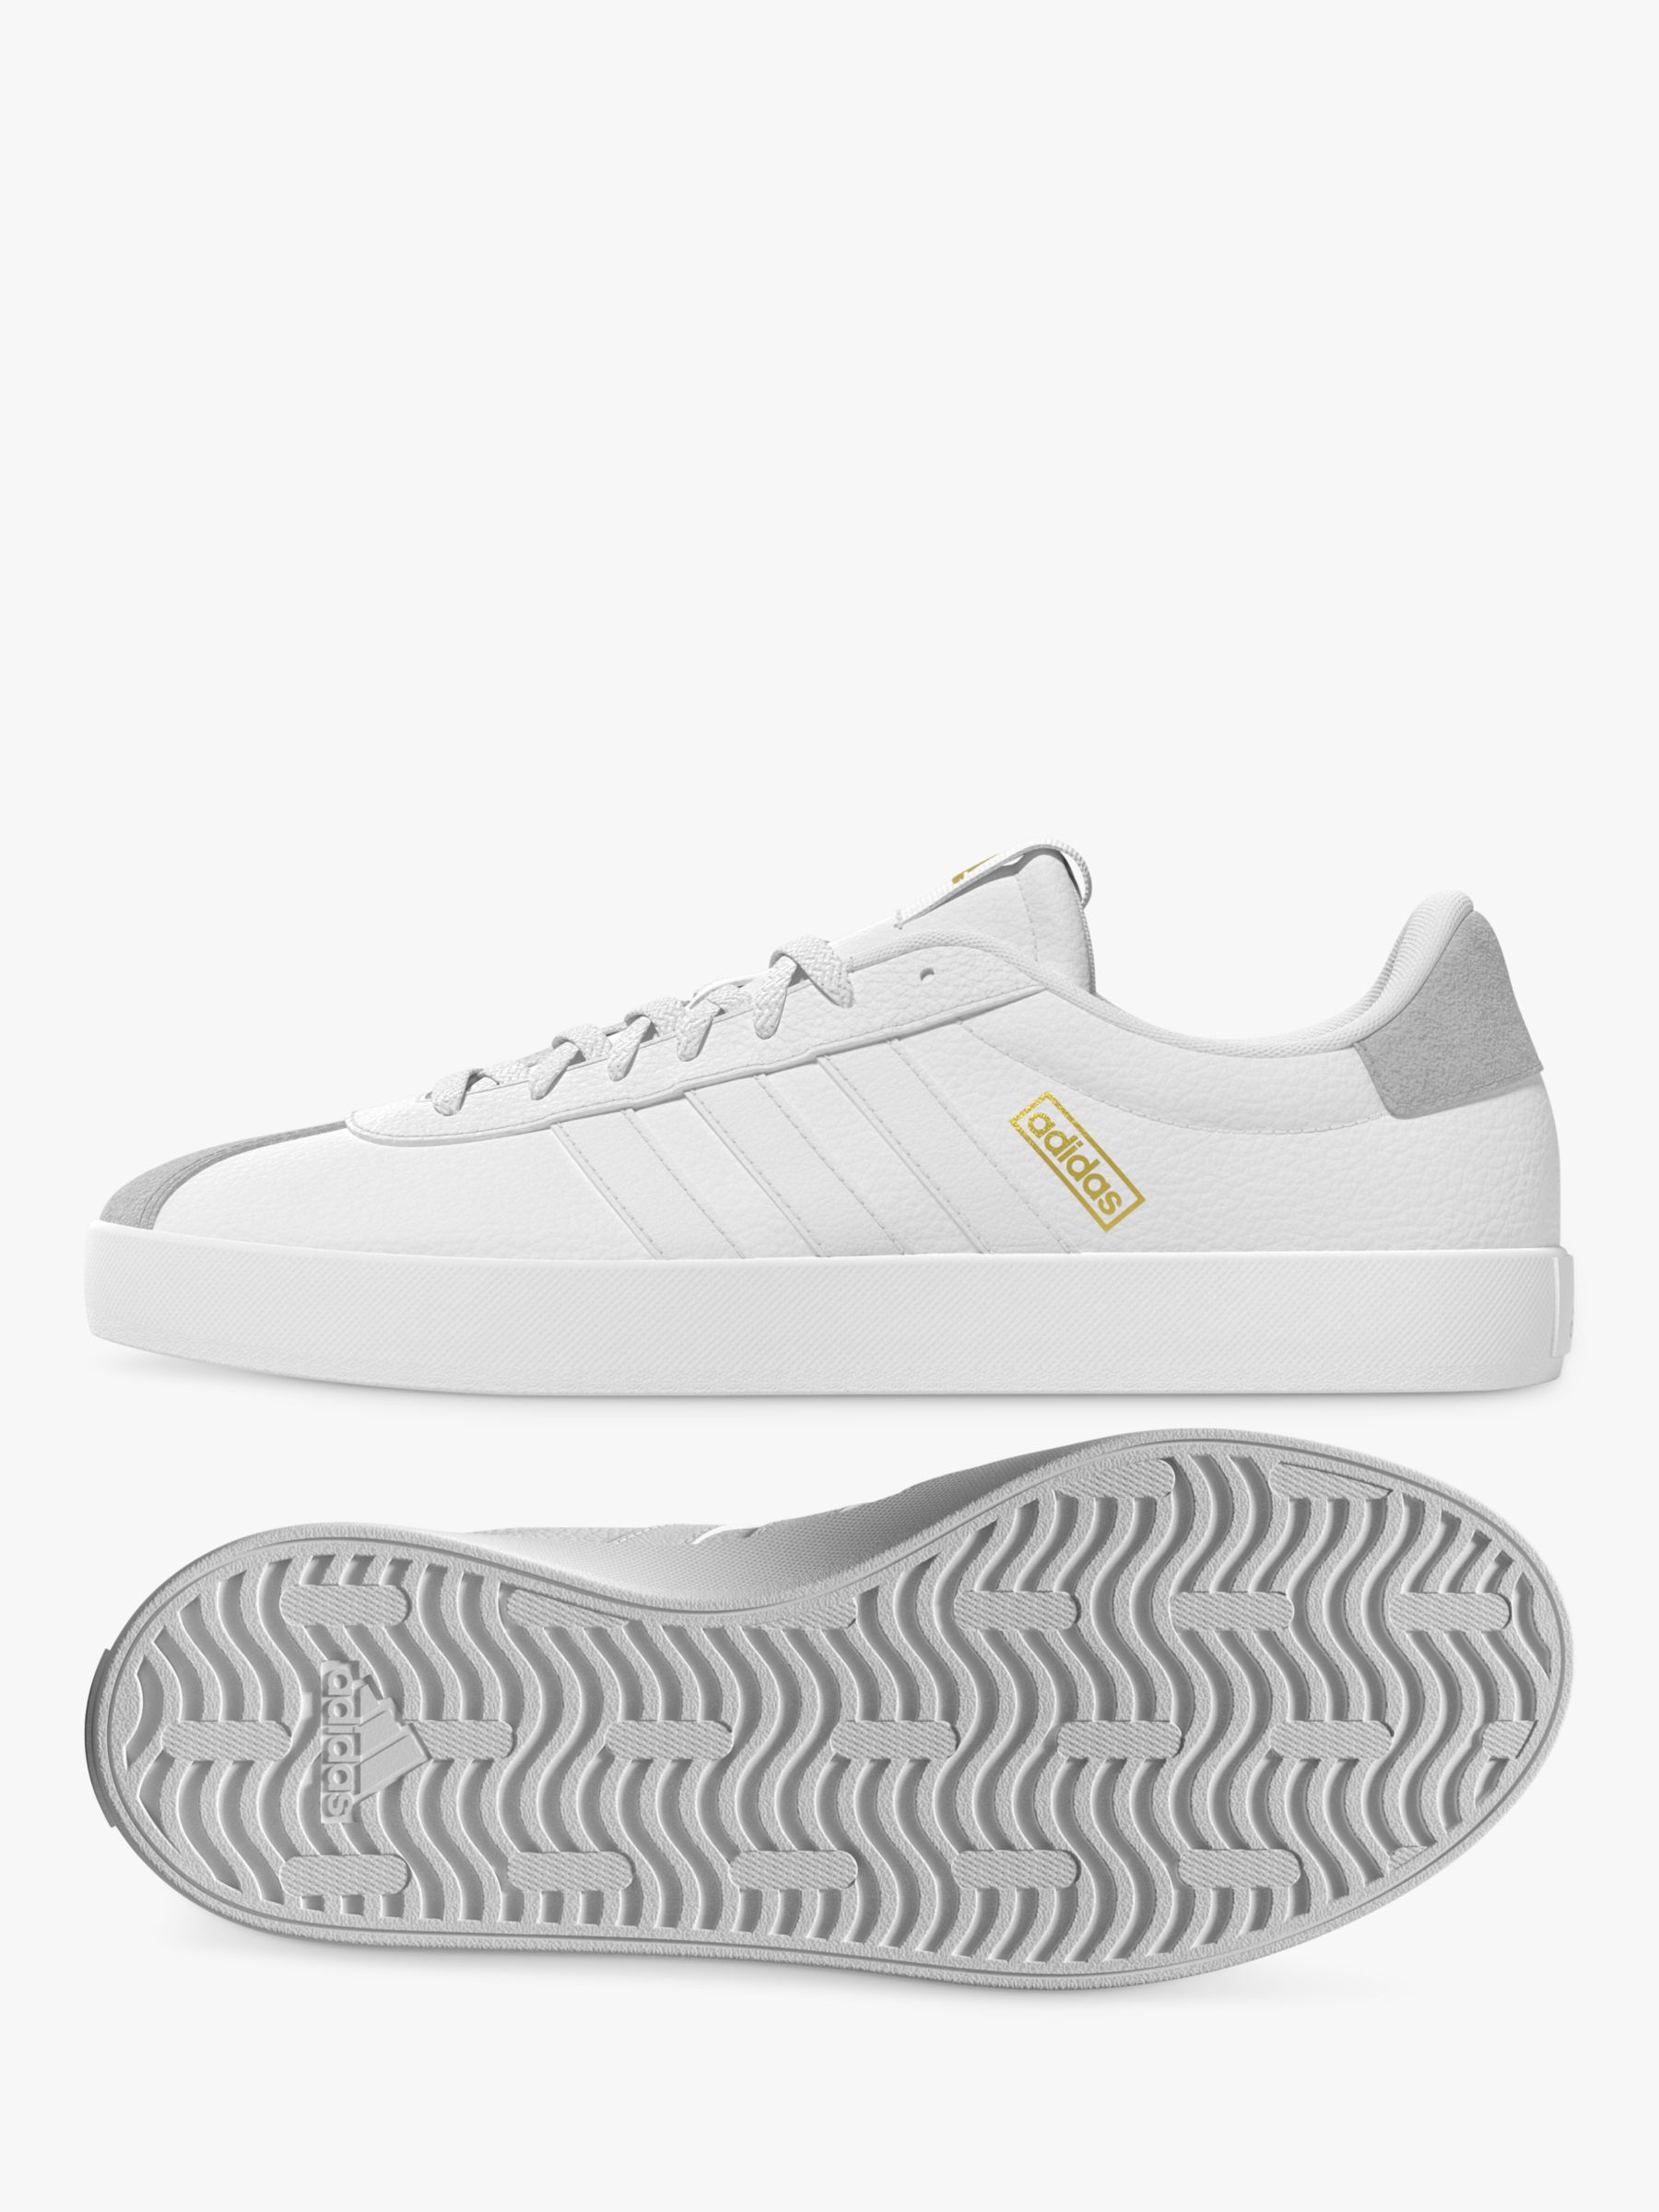 adidas VL Court Trainers, White/White/Grey One at John Lewis & Partners